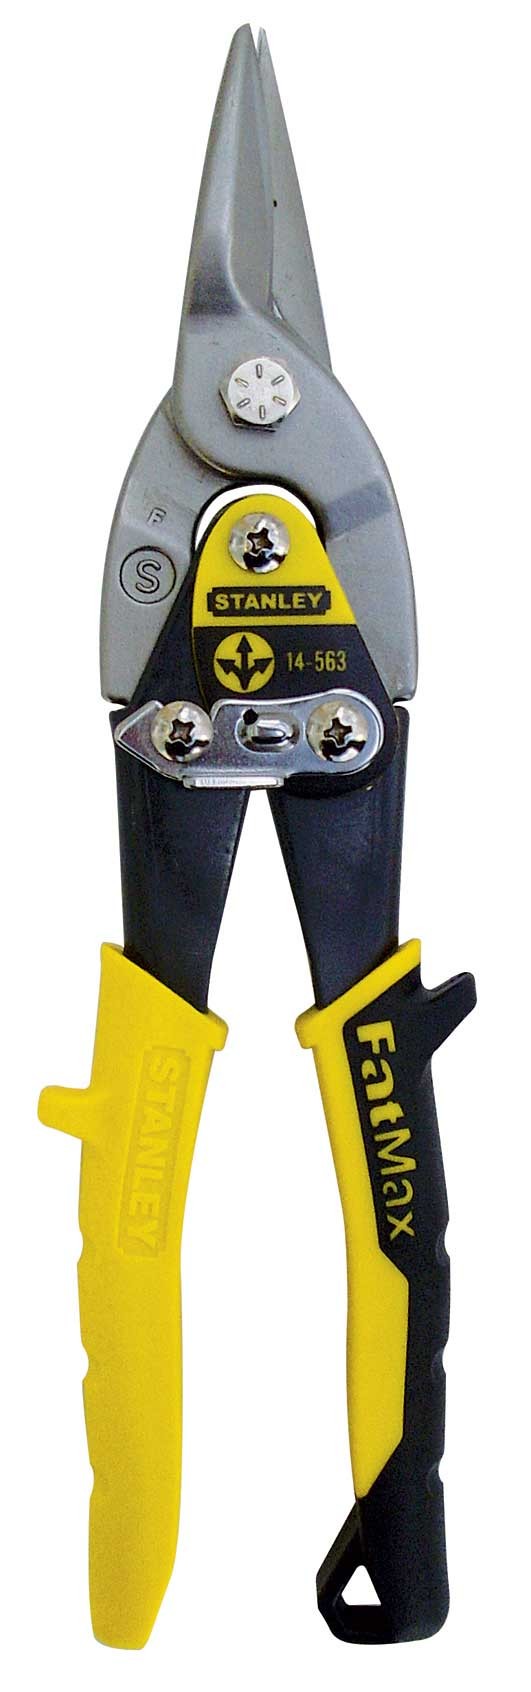 Pince universelle - 180mm - FATMAX - STANLEY - Manubricole